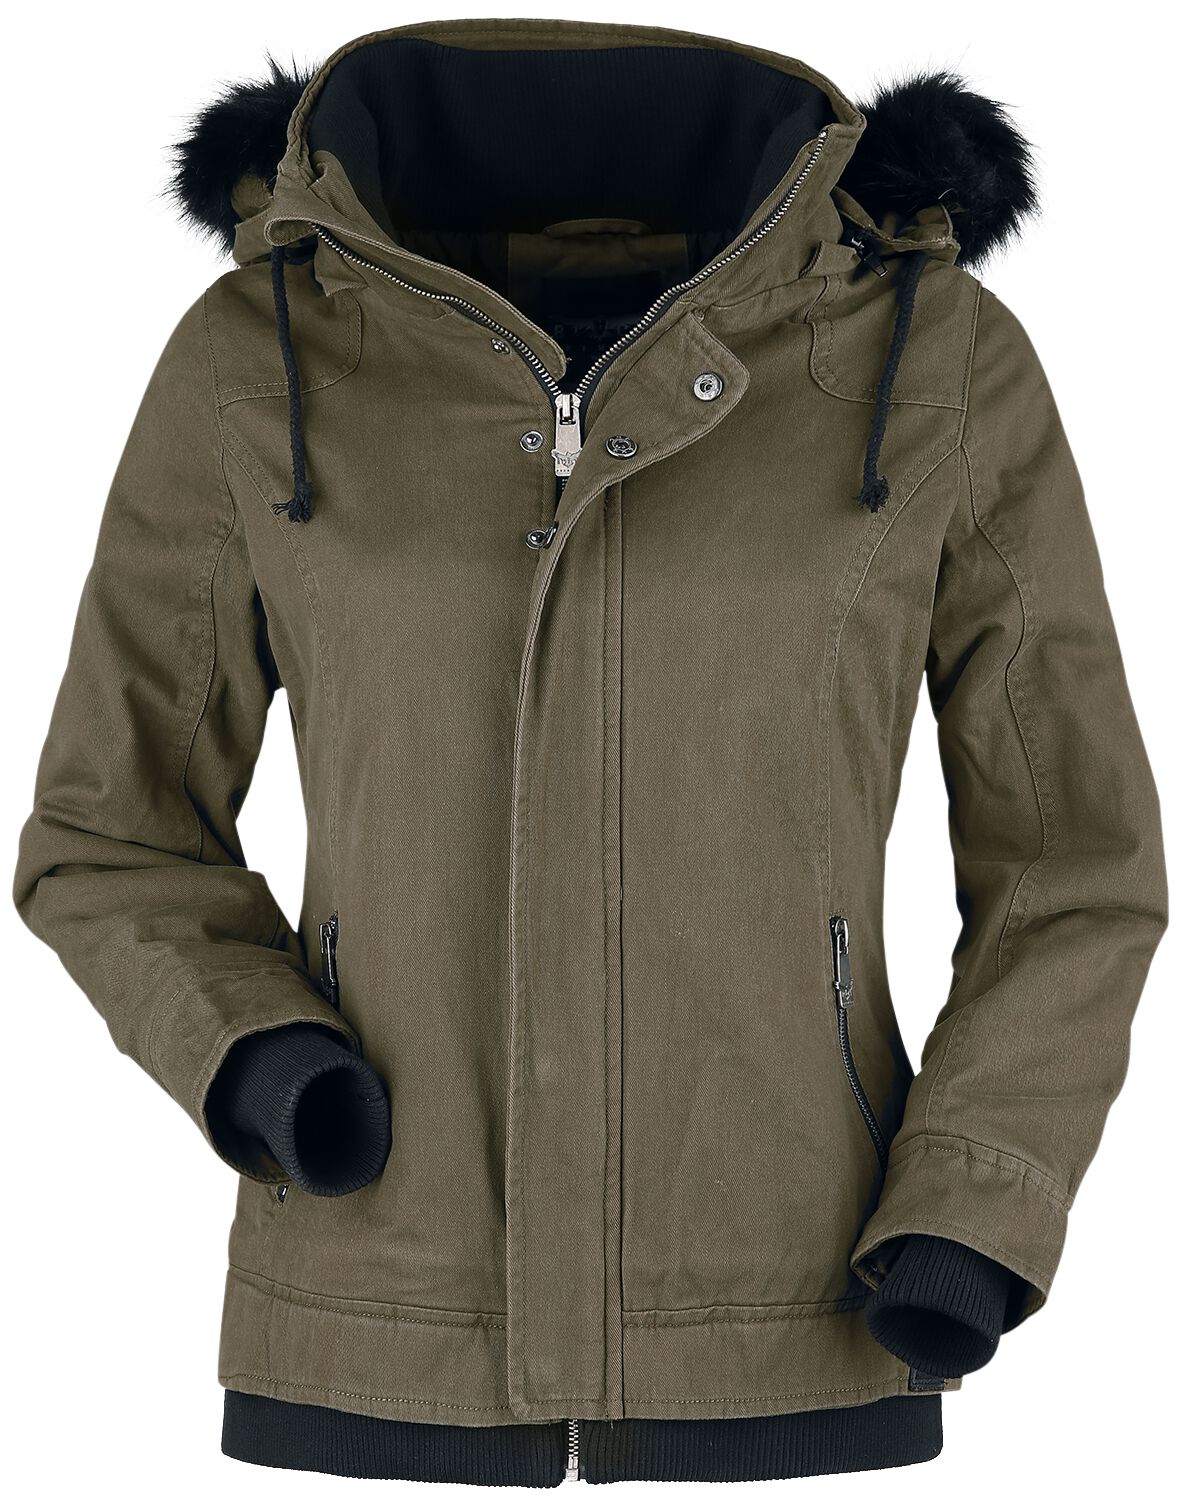 Olive-Green Jacket with Faux Fur Collar and Hood | Black Premium by EMP  Winter Jacket | EMP